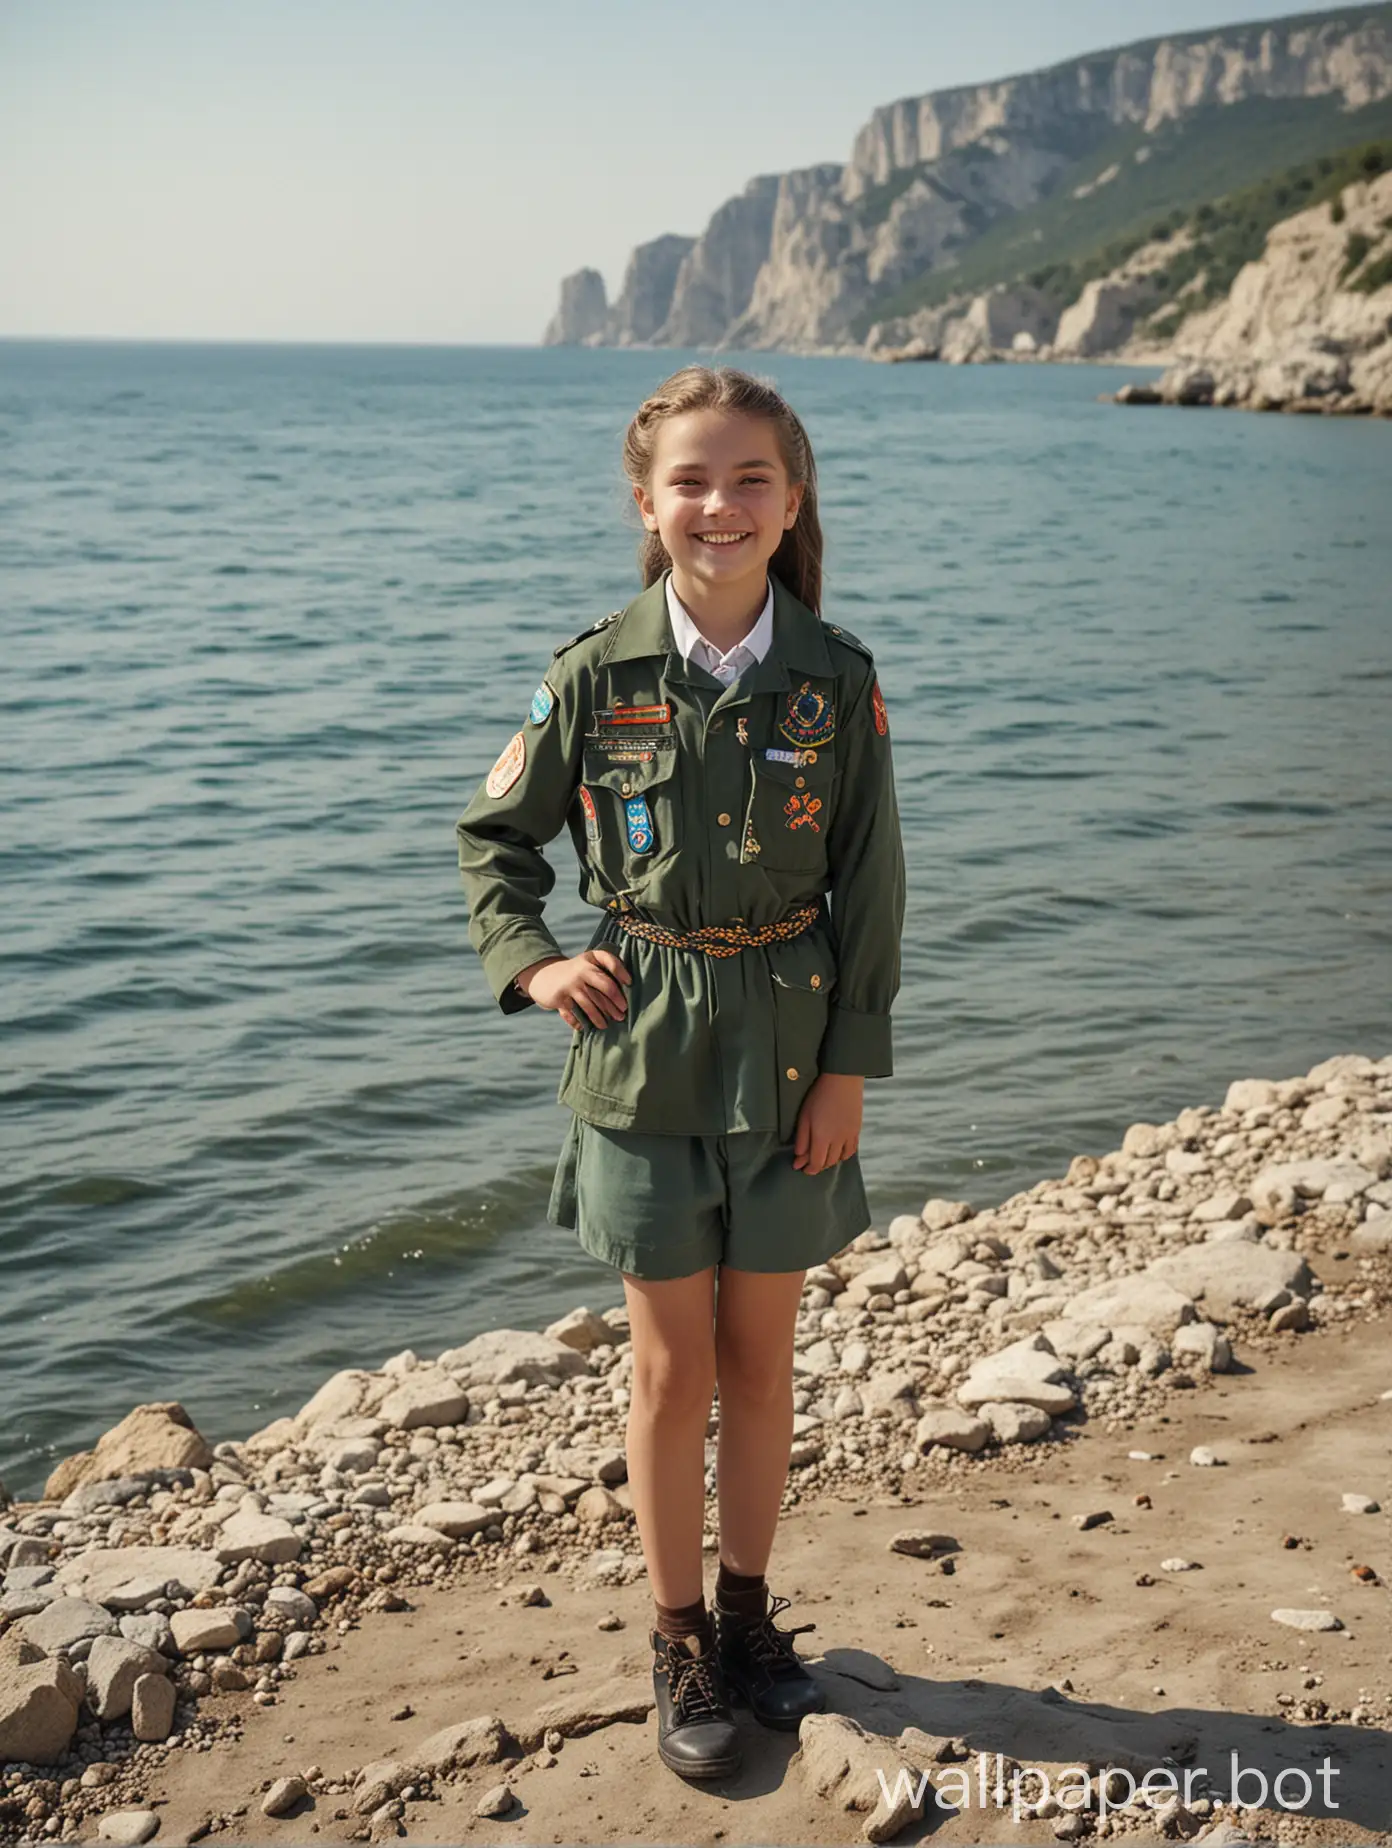 Crimea, view of the sea, 11-year-old girl scout, full height, smile